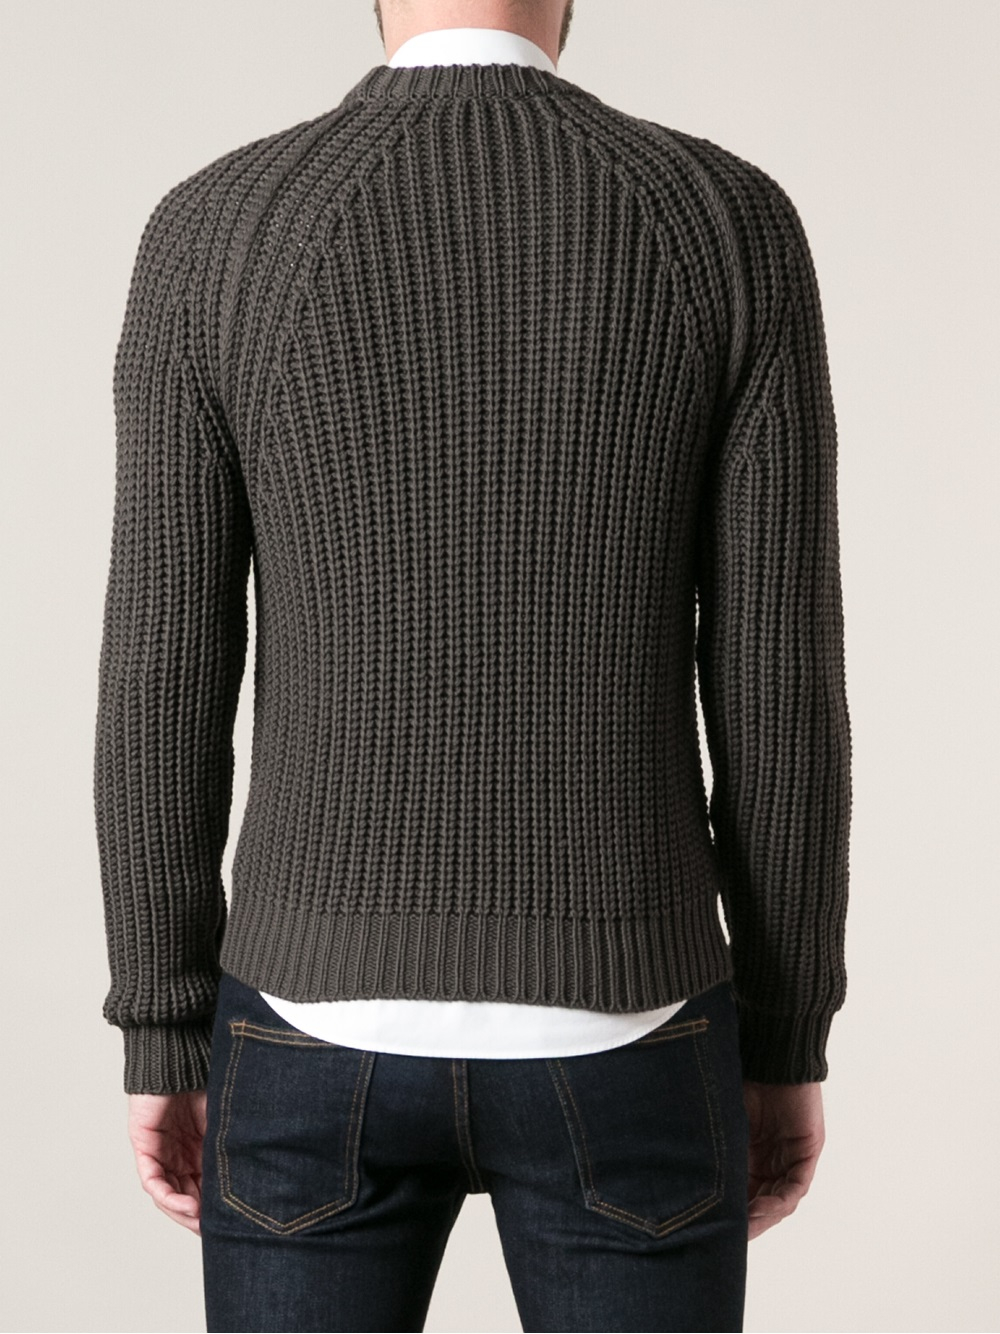 Lanvin Thick Ribbed Sweater in Grey (Gray) for Men - Lyst